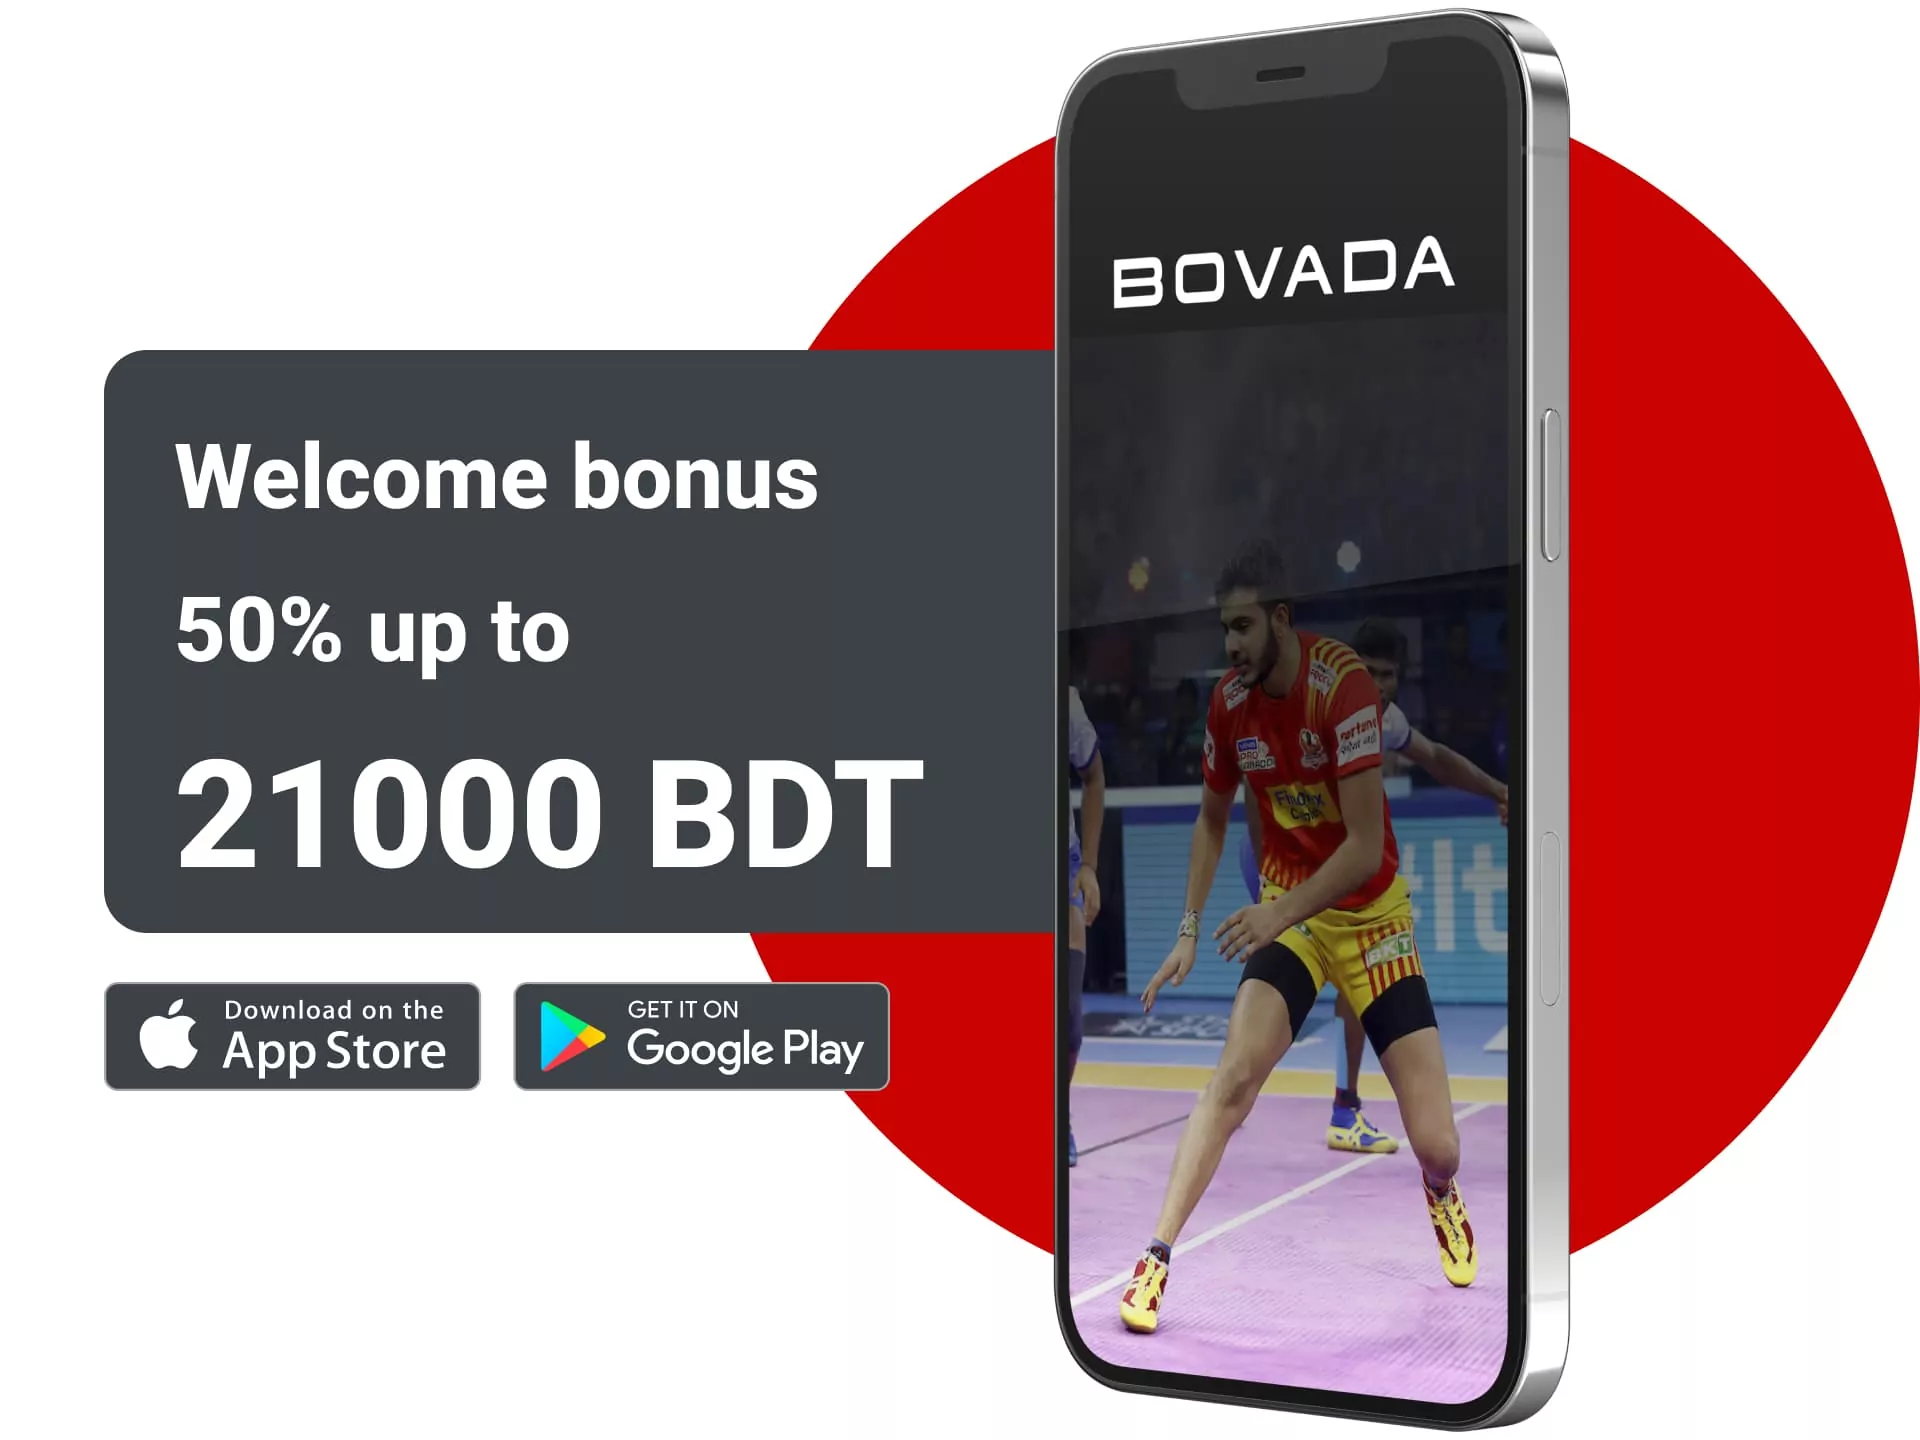 Bovada accepts bets on kabaddi and gives welcome bonus up to 21,000 BDT.